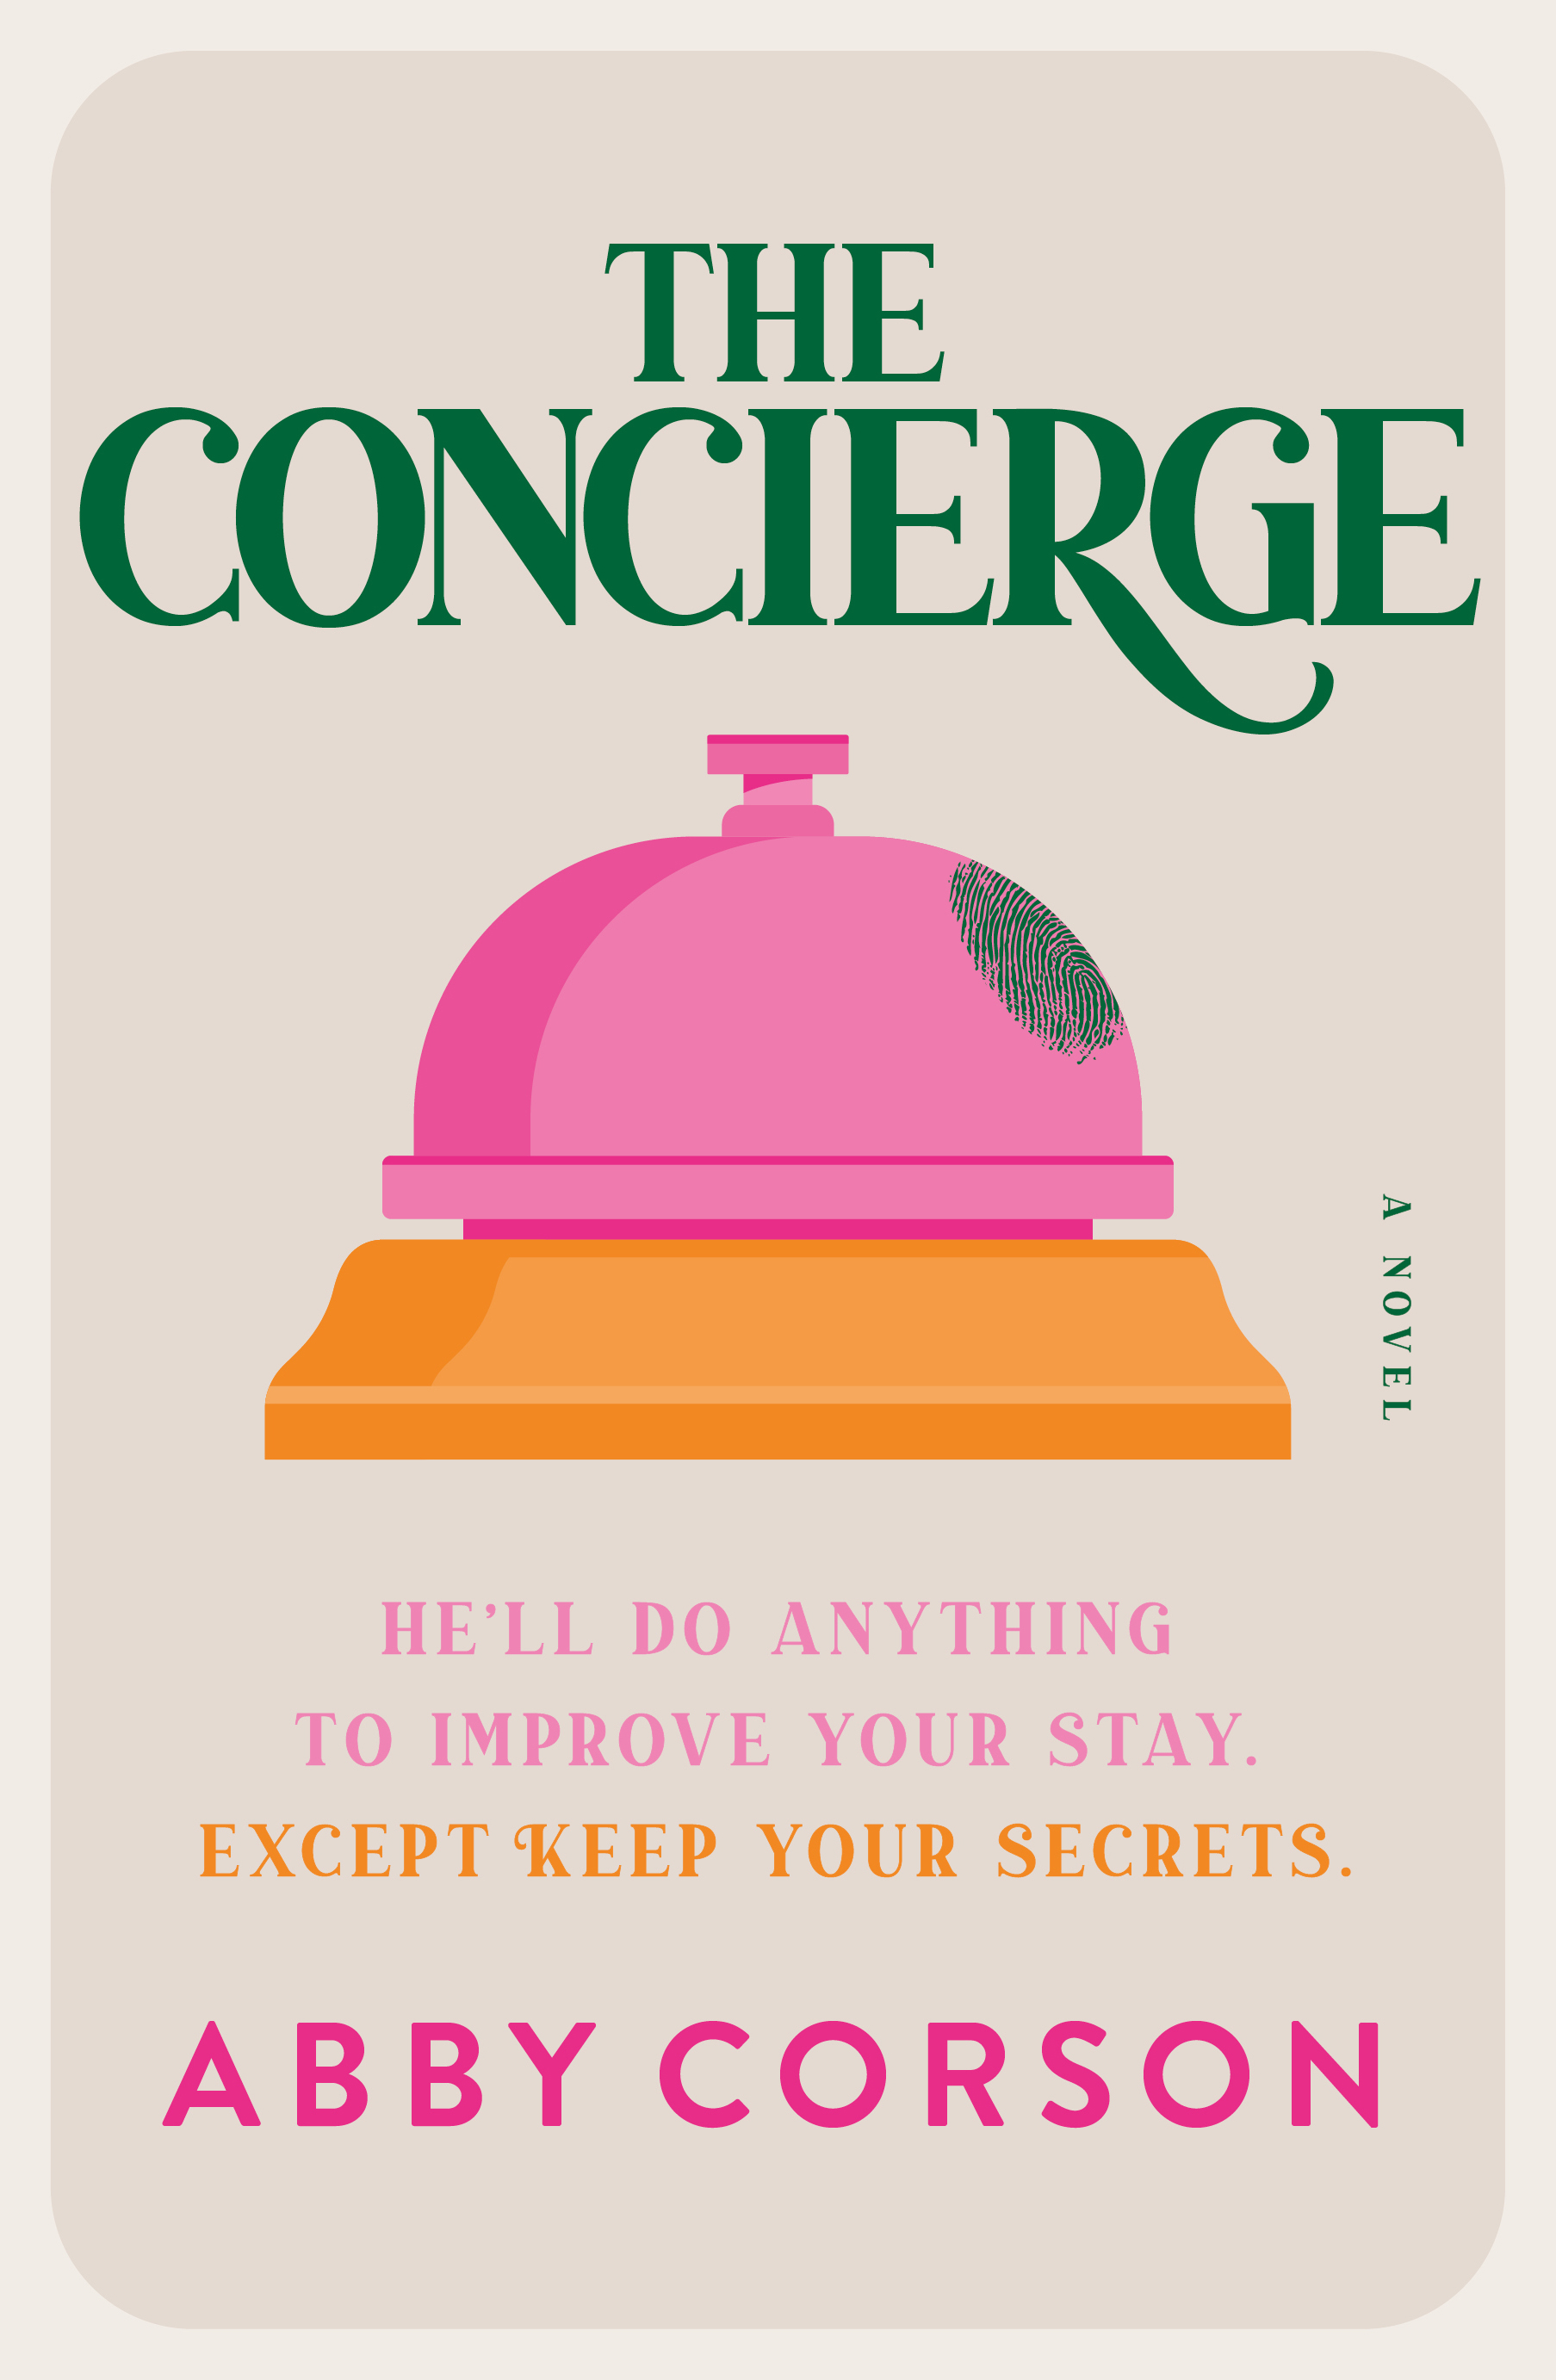 The Concierge by Abby Corson